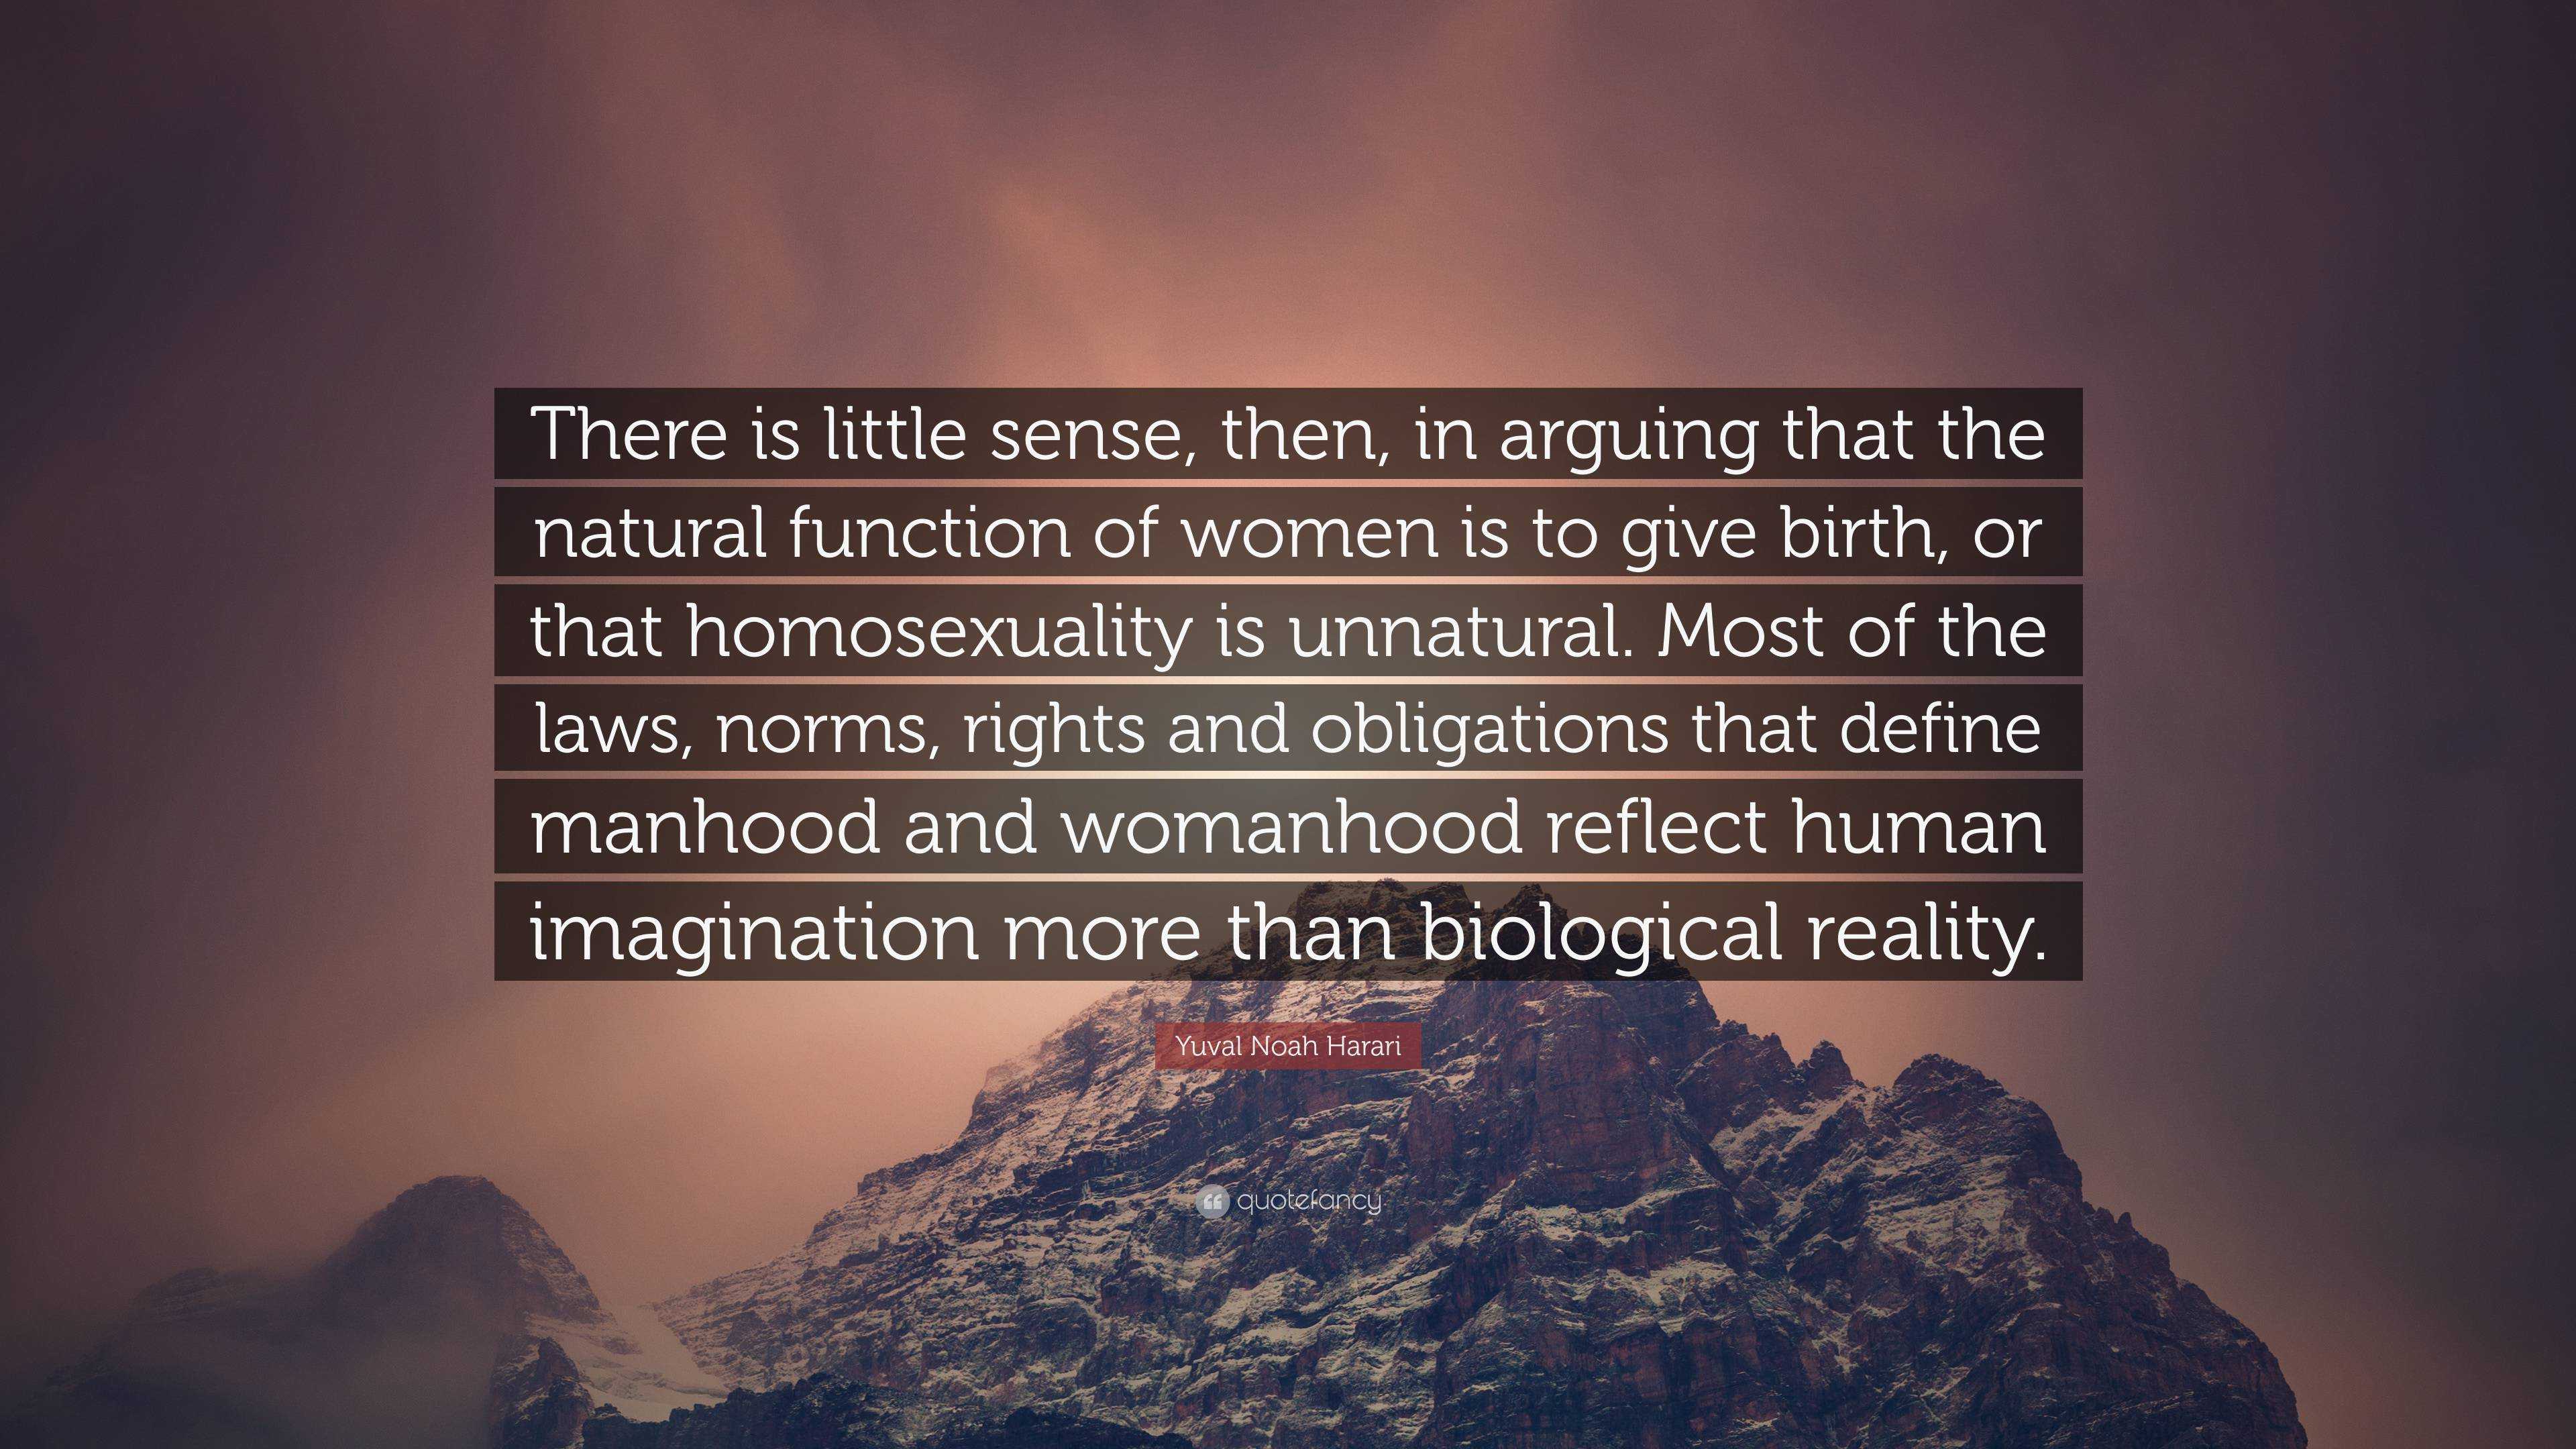 Yuval Noah Harari Quote: “Evolution moulded our minds and bodies